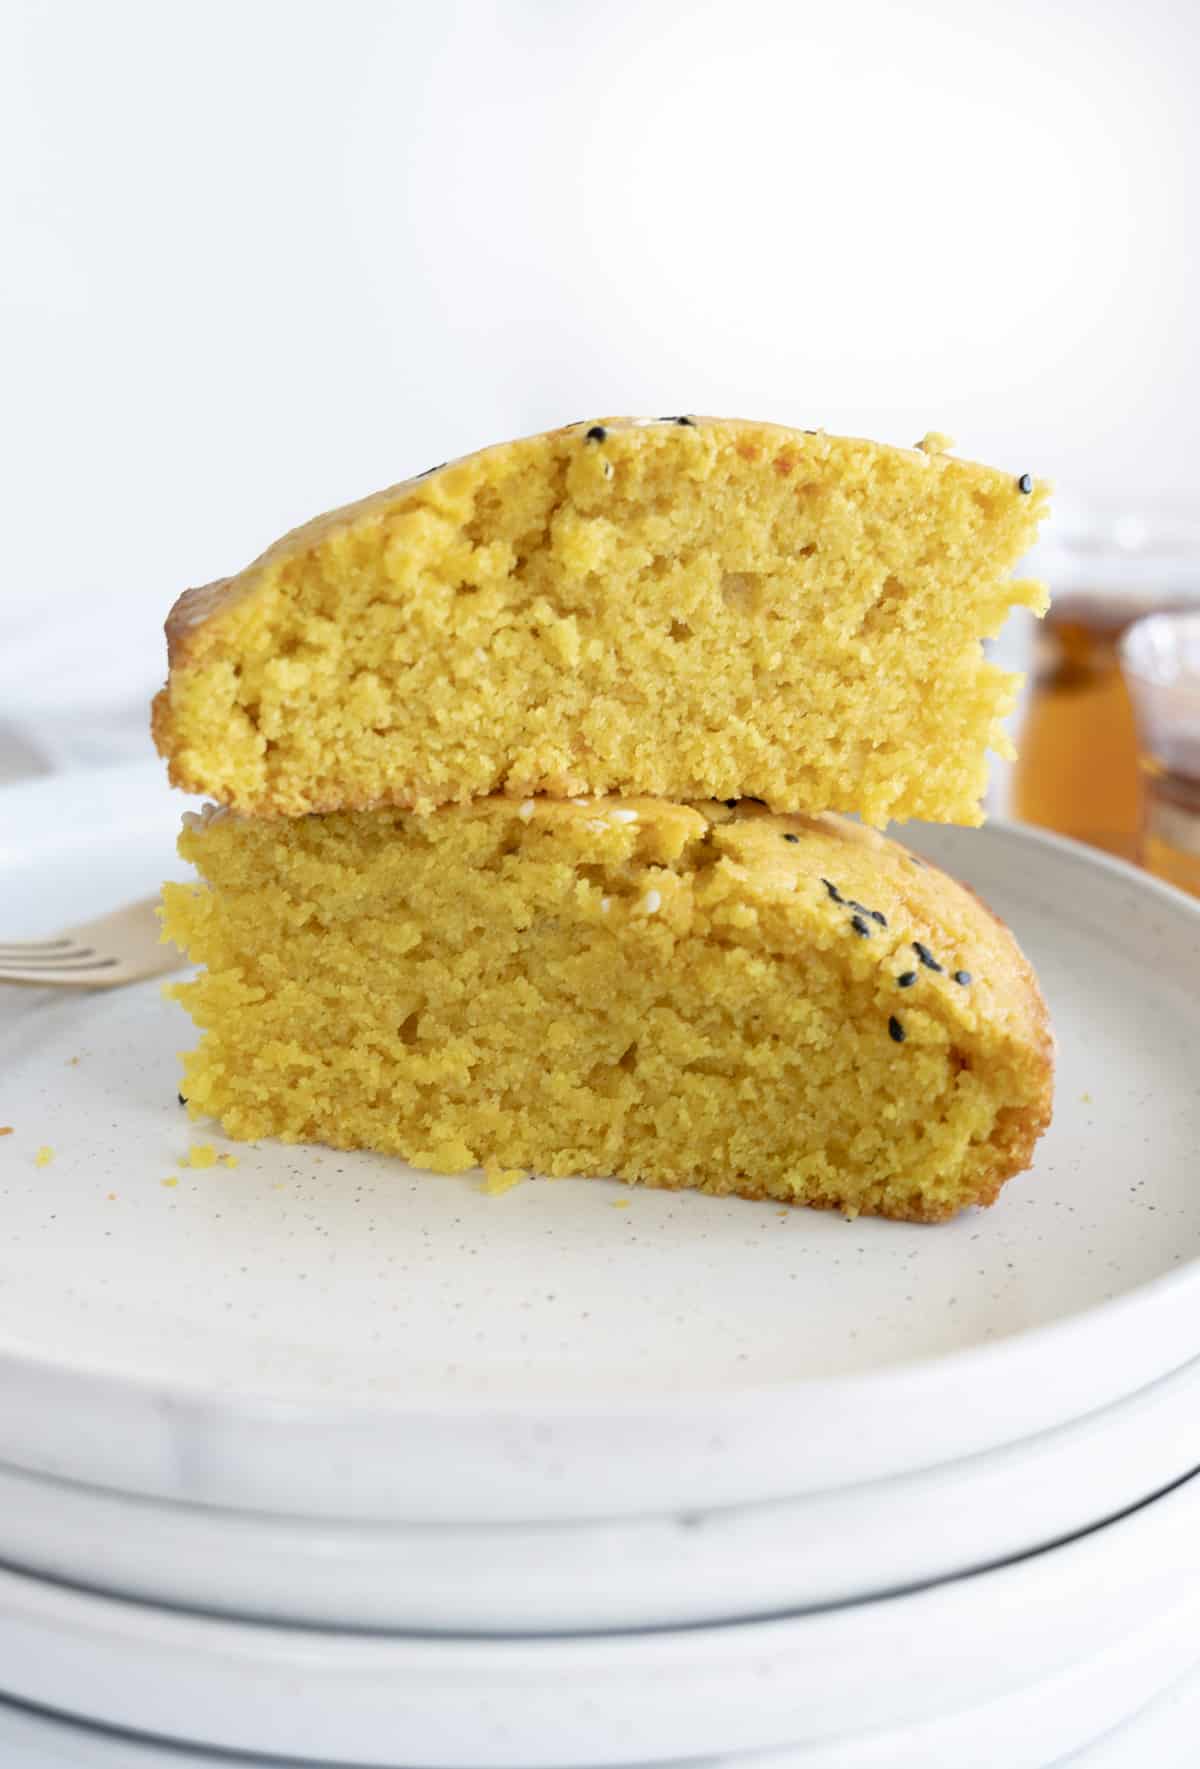 two slices of yellow semolina cake stacked on top of each other